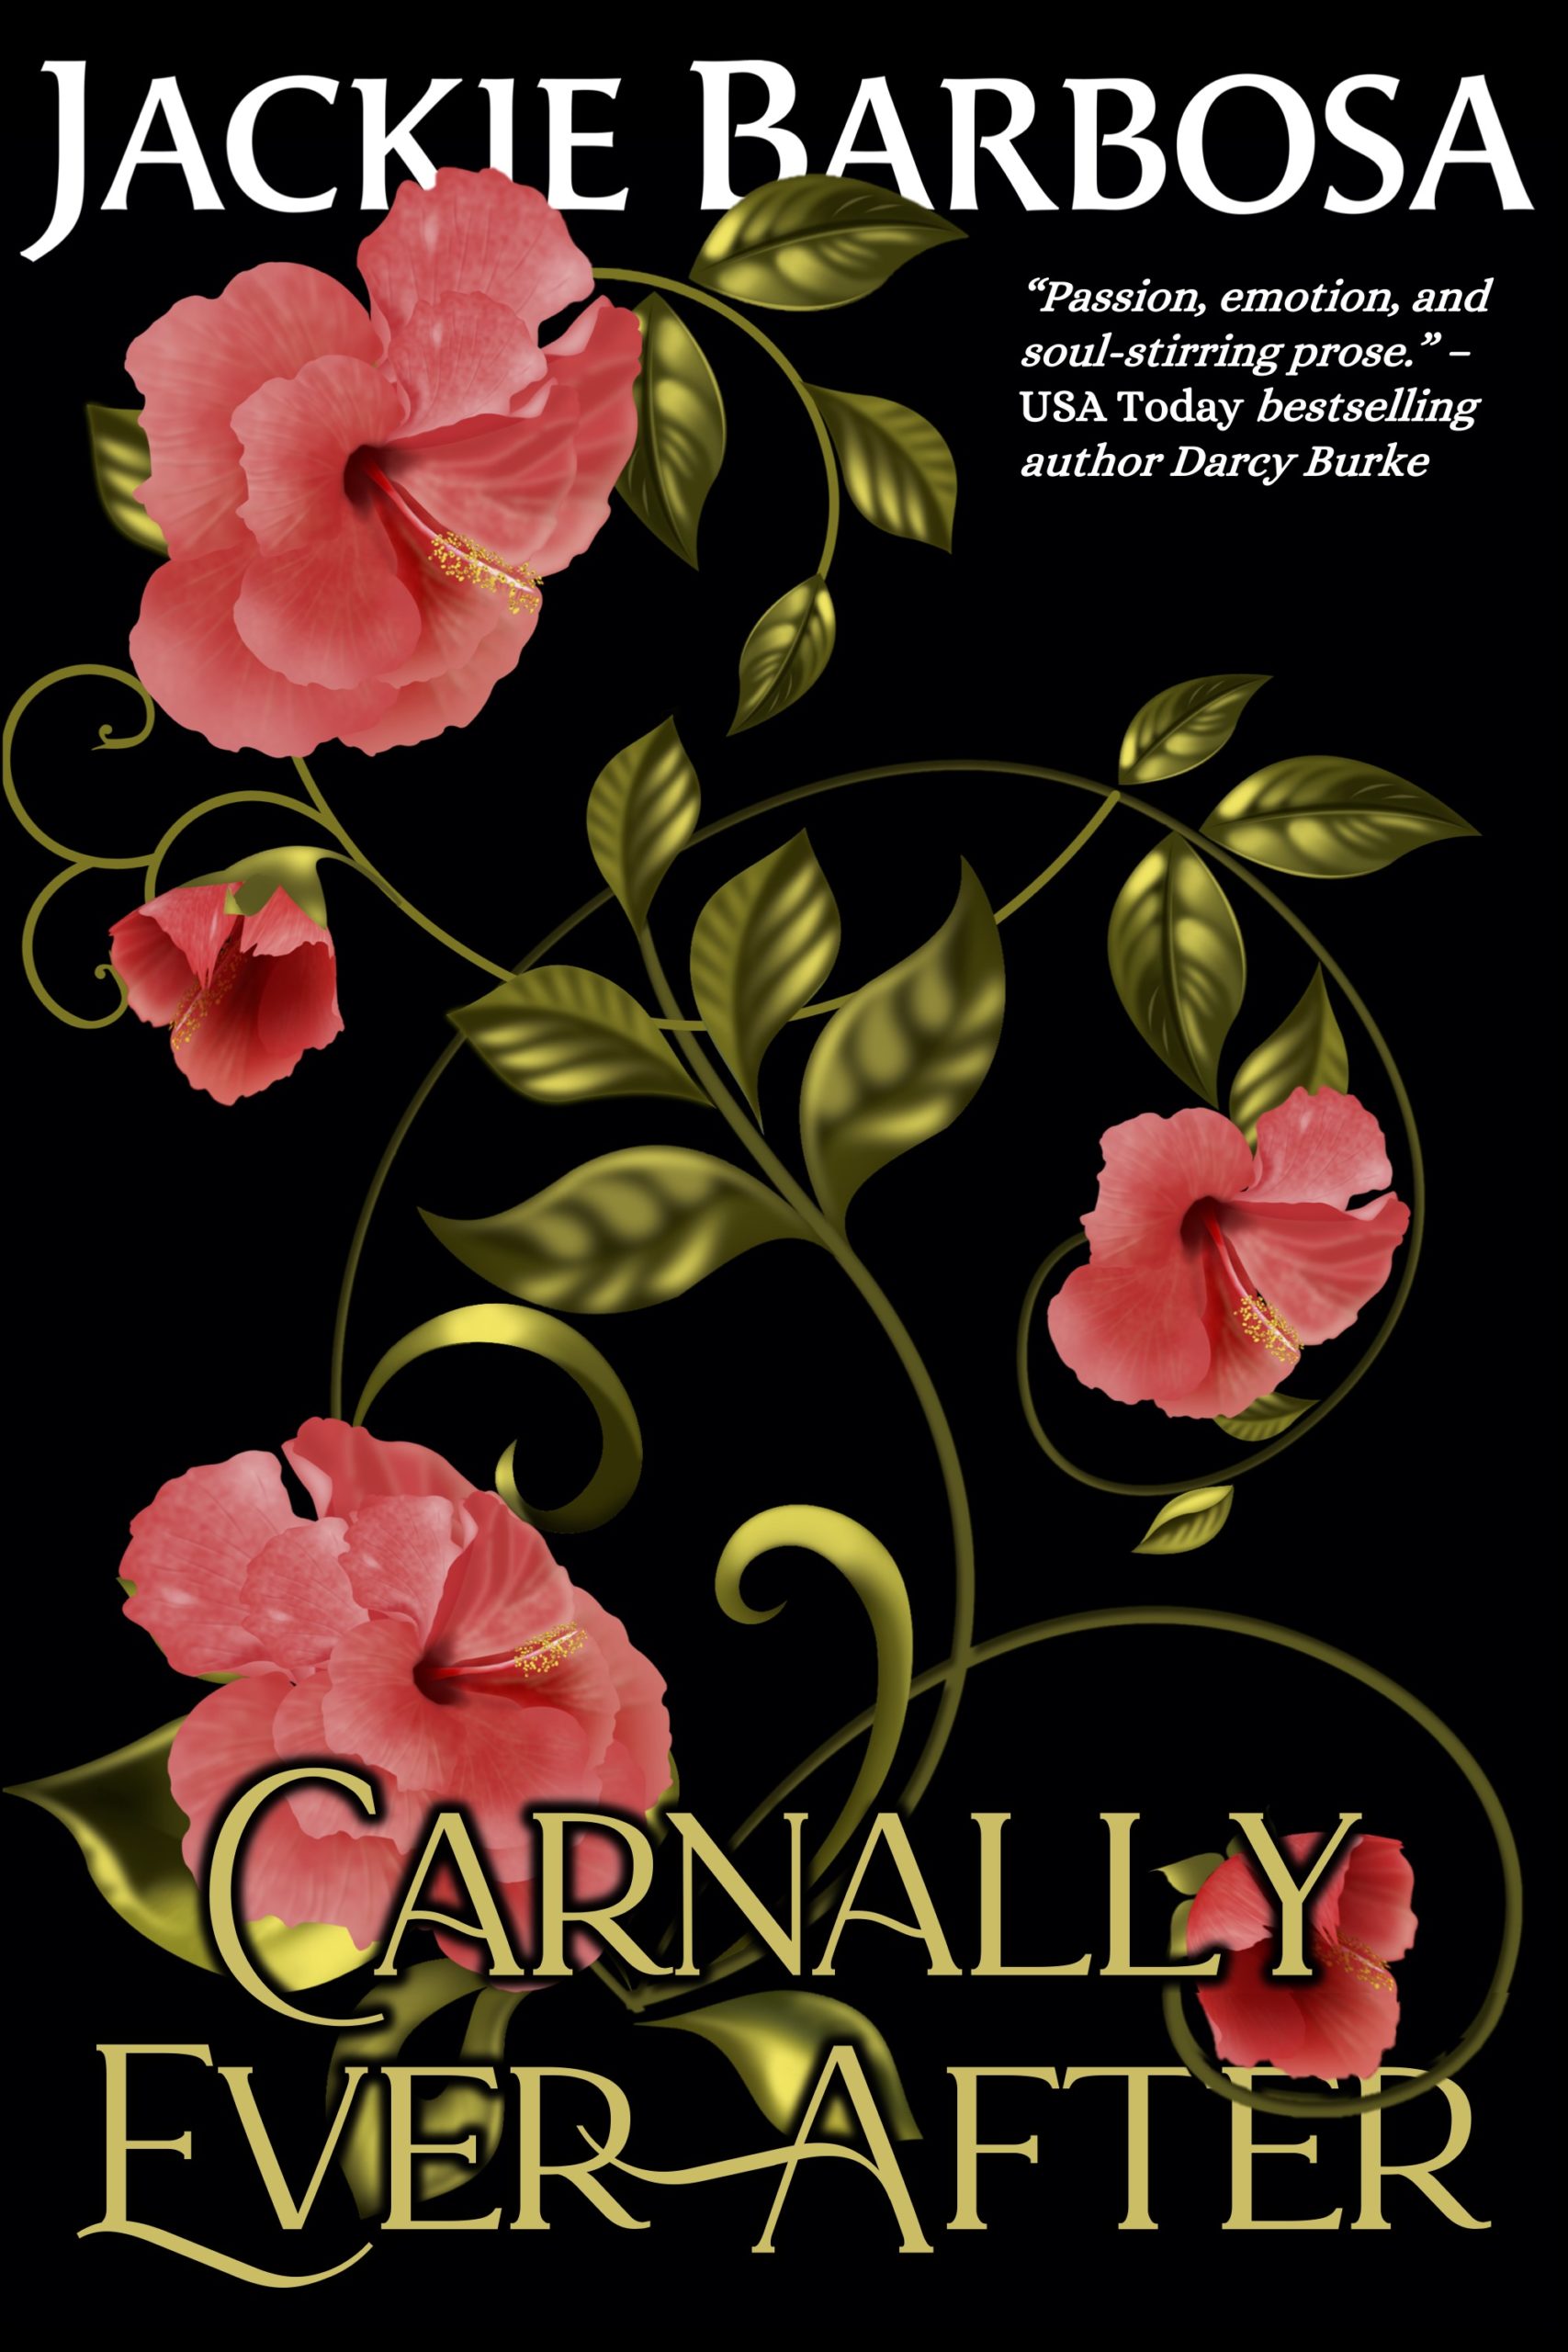 Carnally Ever After by Jackie Barbosa